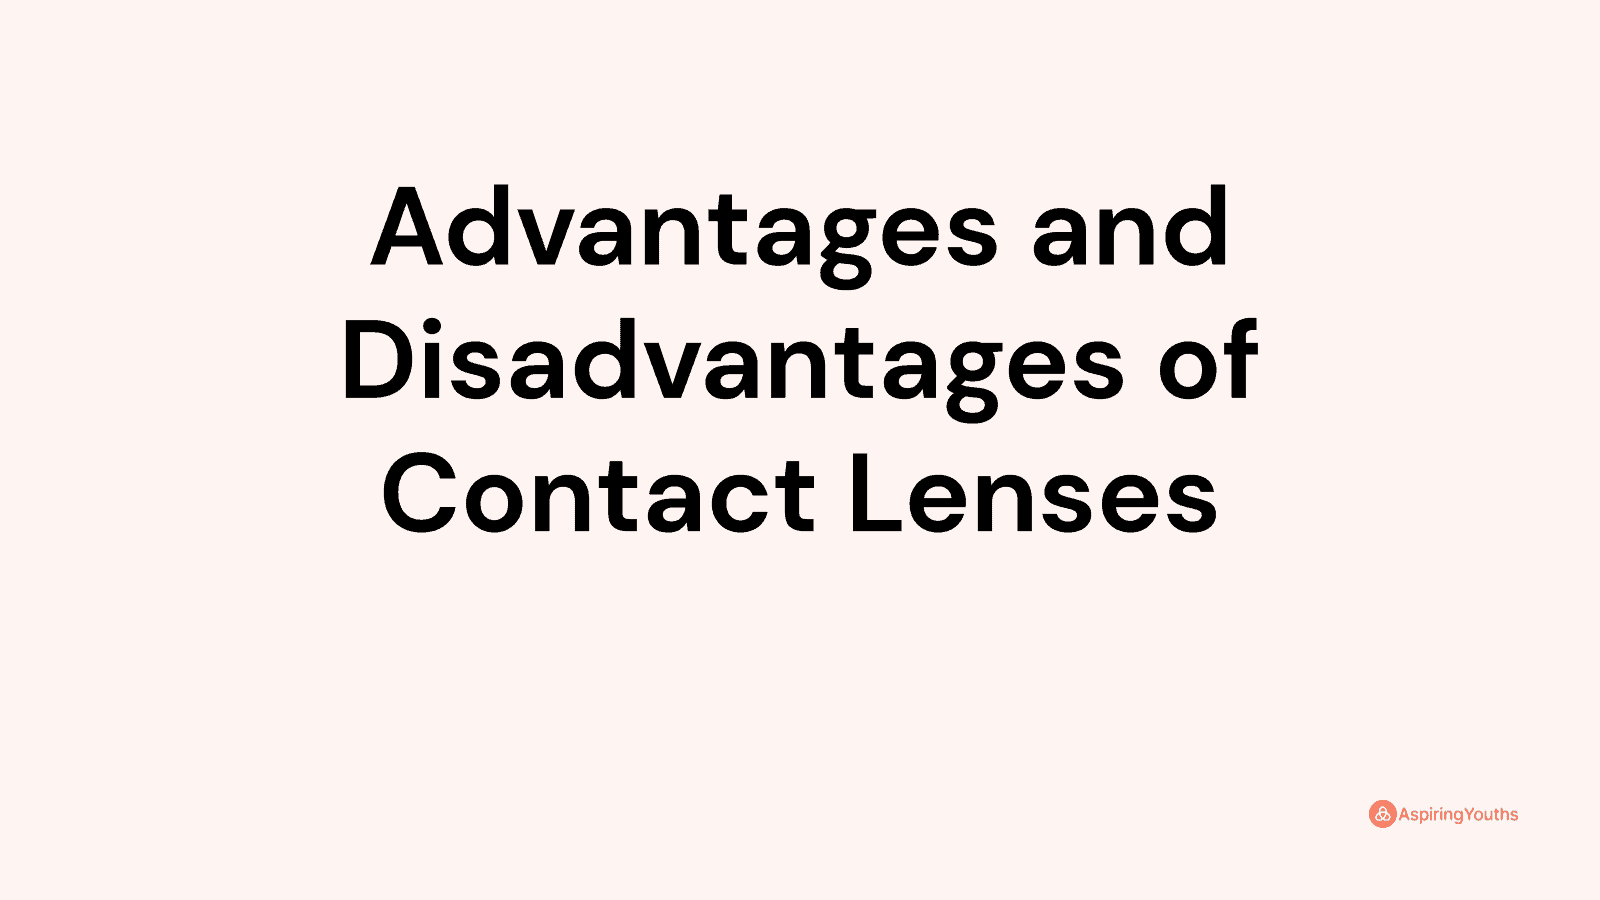 Advantages and disadvantages of Contact Lenses